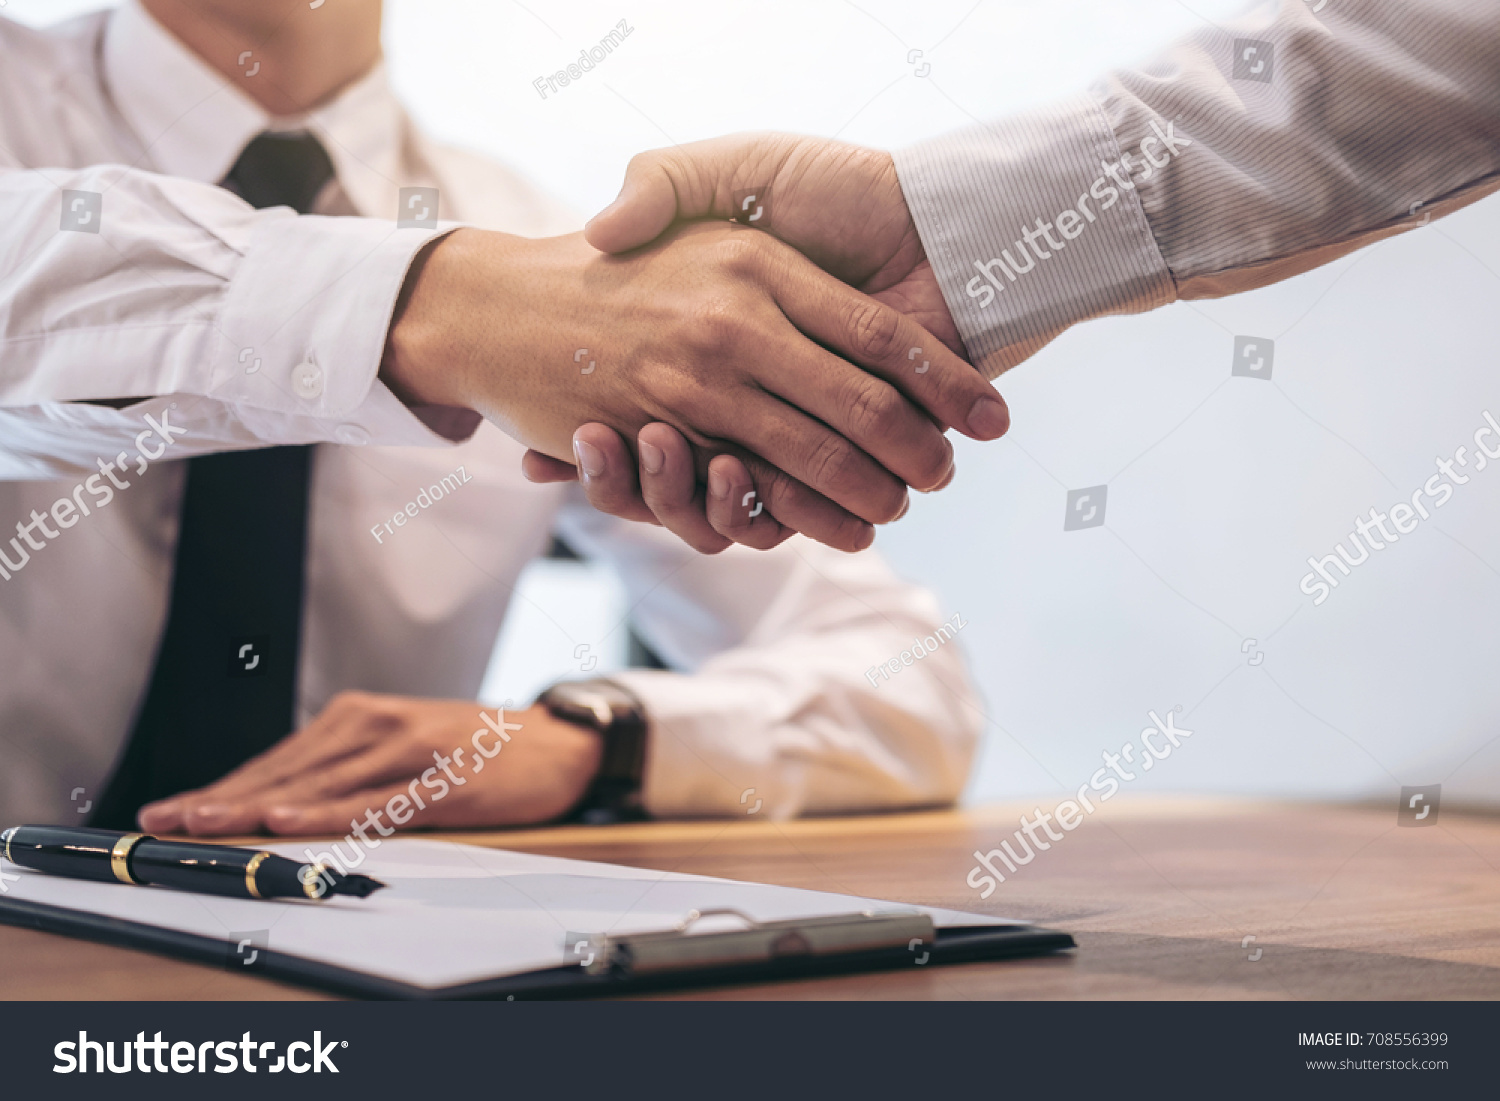 Real estate broker agent and customer shaking hands after signing contract documents for realty purchase, Bank employees congratulate, Concept mortgage loan approval. #708556399